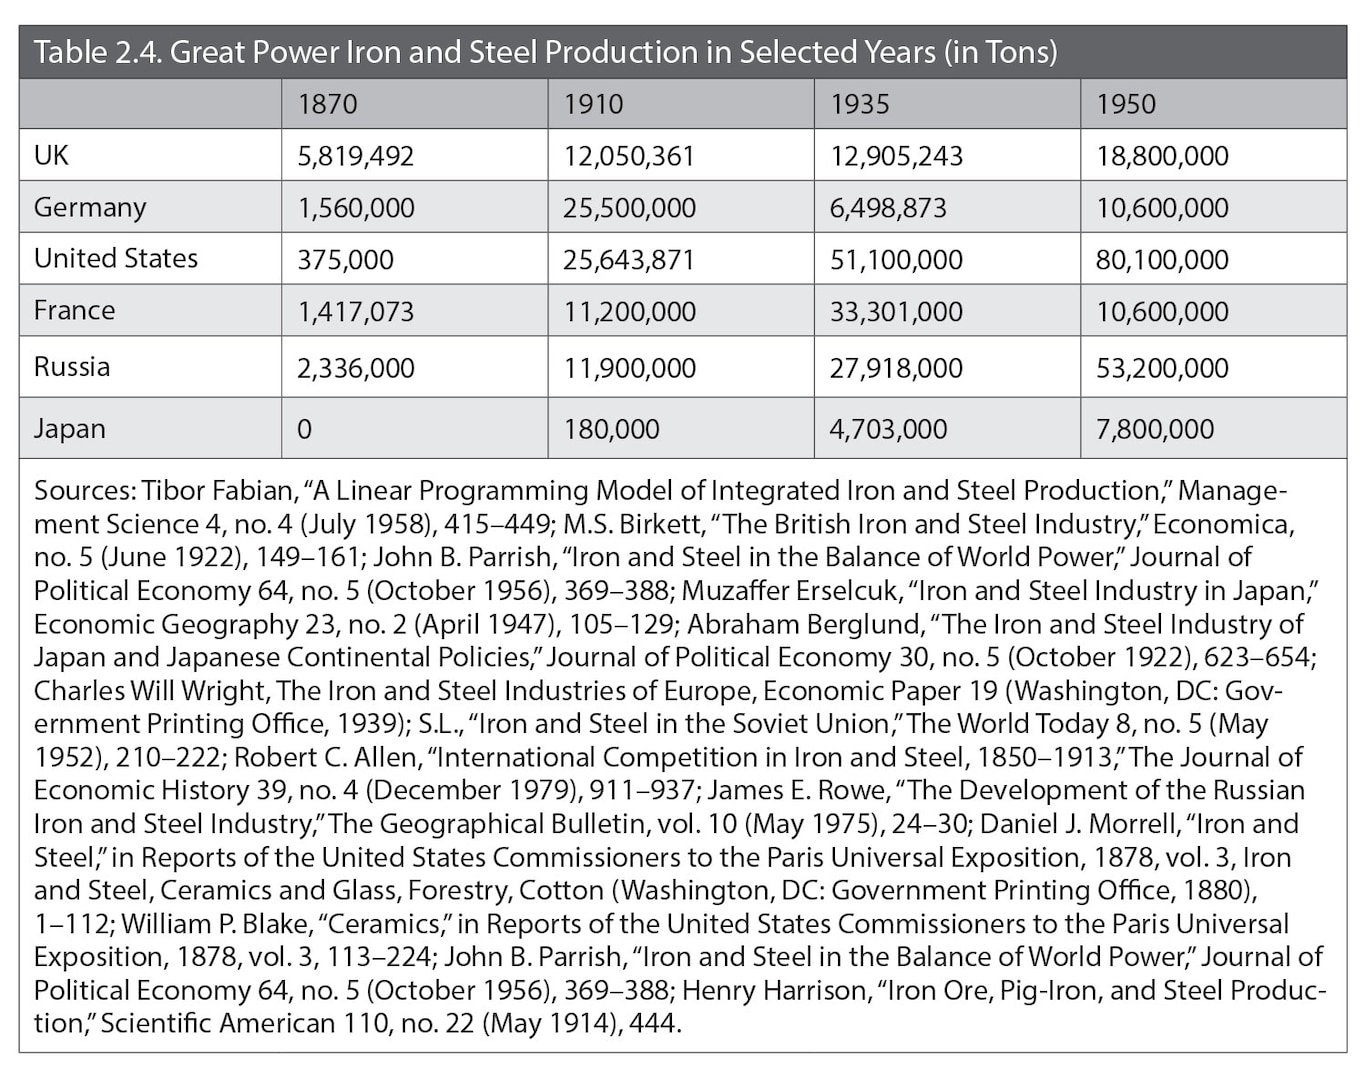 Table 2.4. Great Power Iron and Steel Production in Selected Years (in Tons)